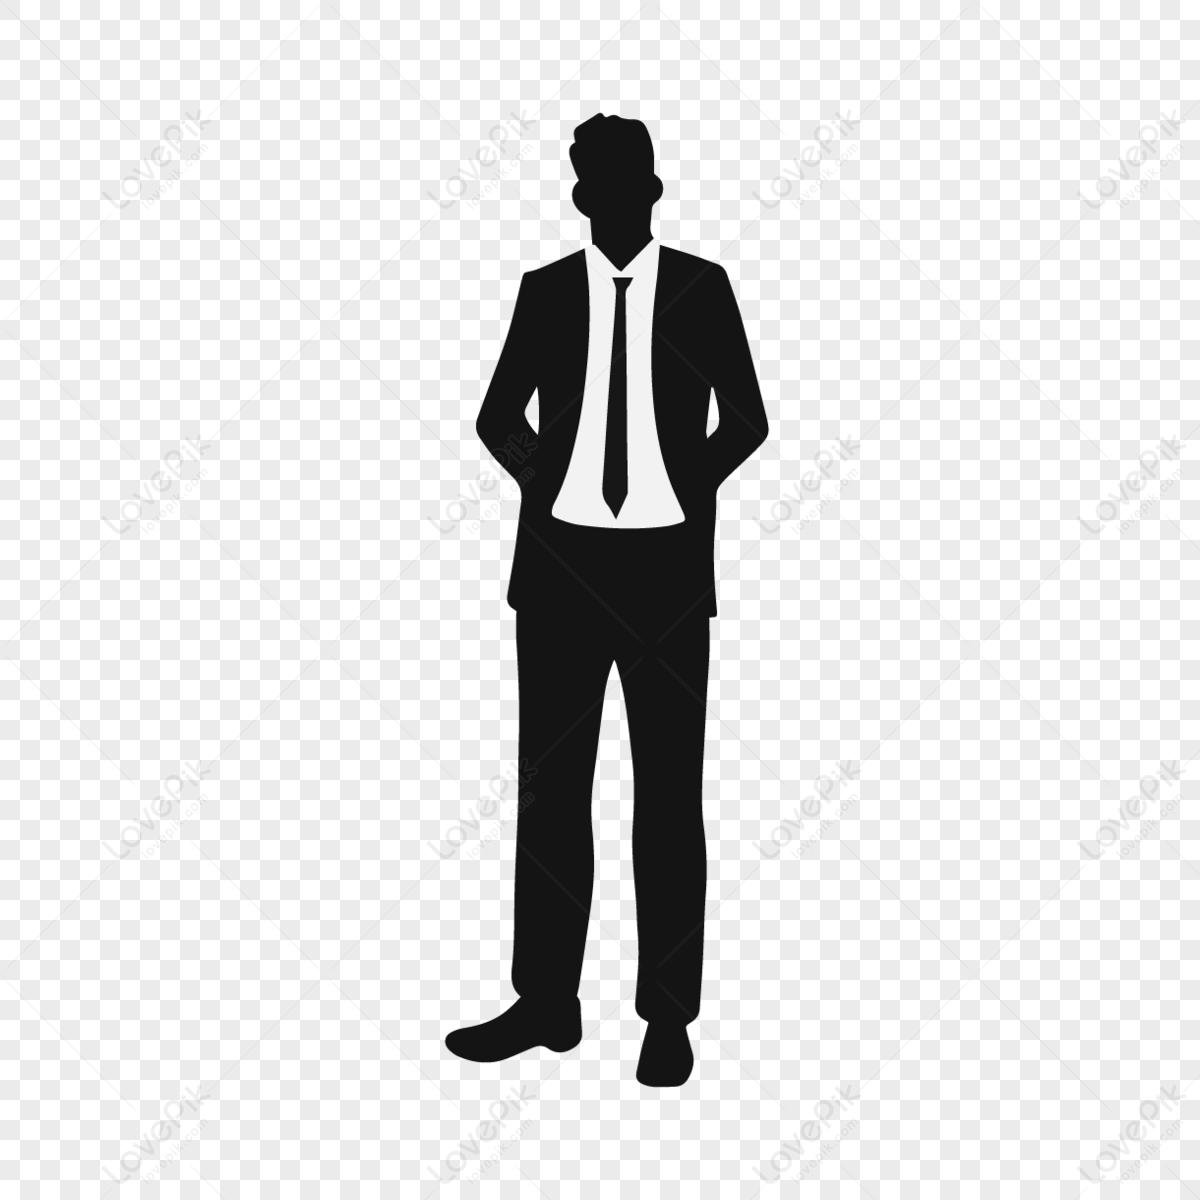 Buy Businessman Business Man Pose Poses Actions Sit Sitting Stand Standing  Think Thinking Raise Hand Taking Selfie PNG SVG EPS Vector Download Online  in India - Etsy